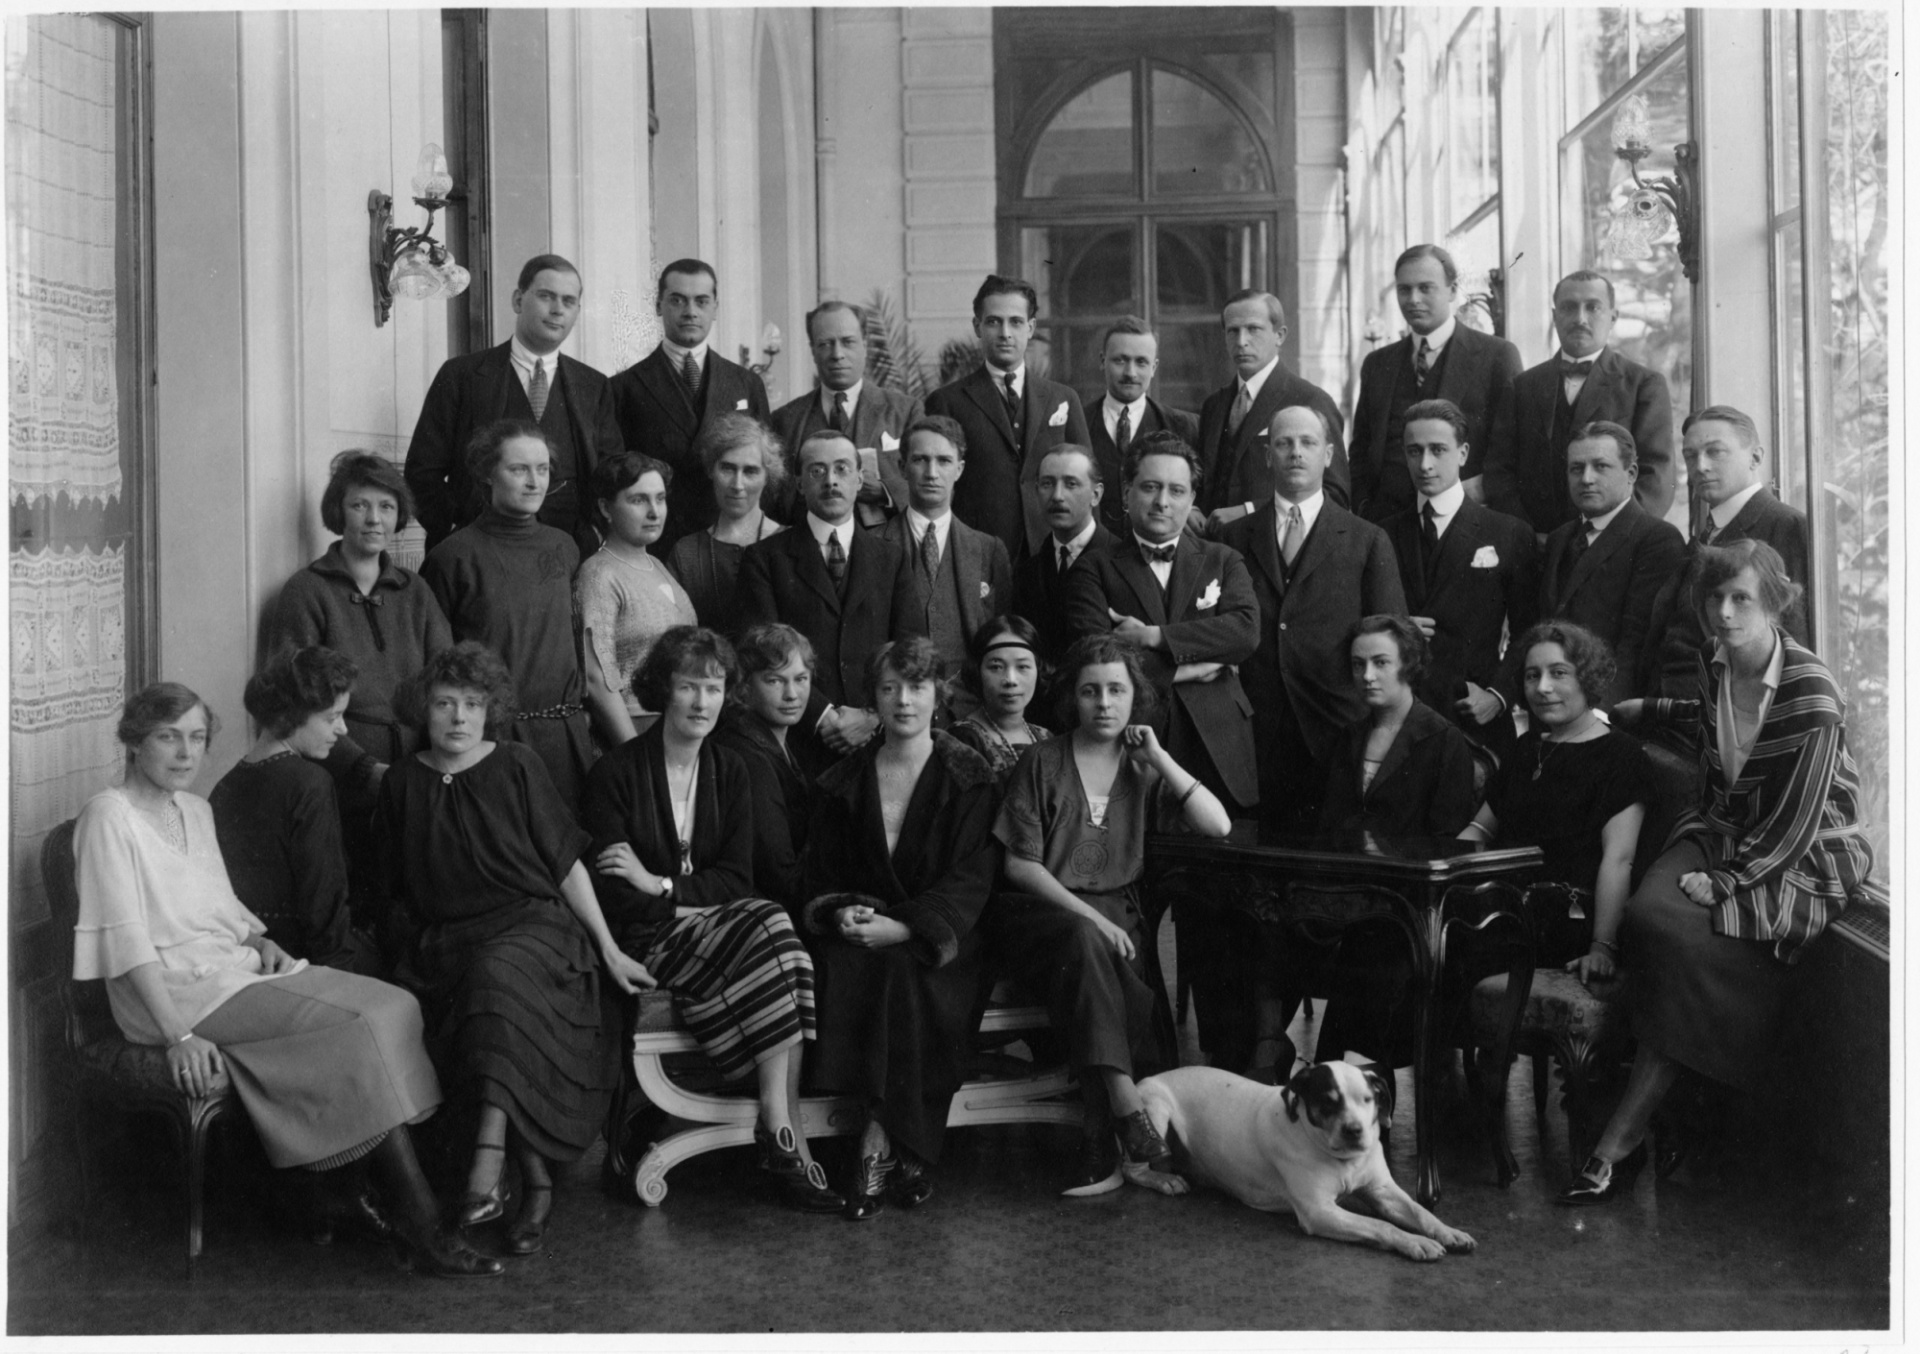 A group of women and men posing for a black and white group picture in a large room with high ceilings. In the first row, there is a dog as well. 